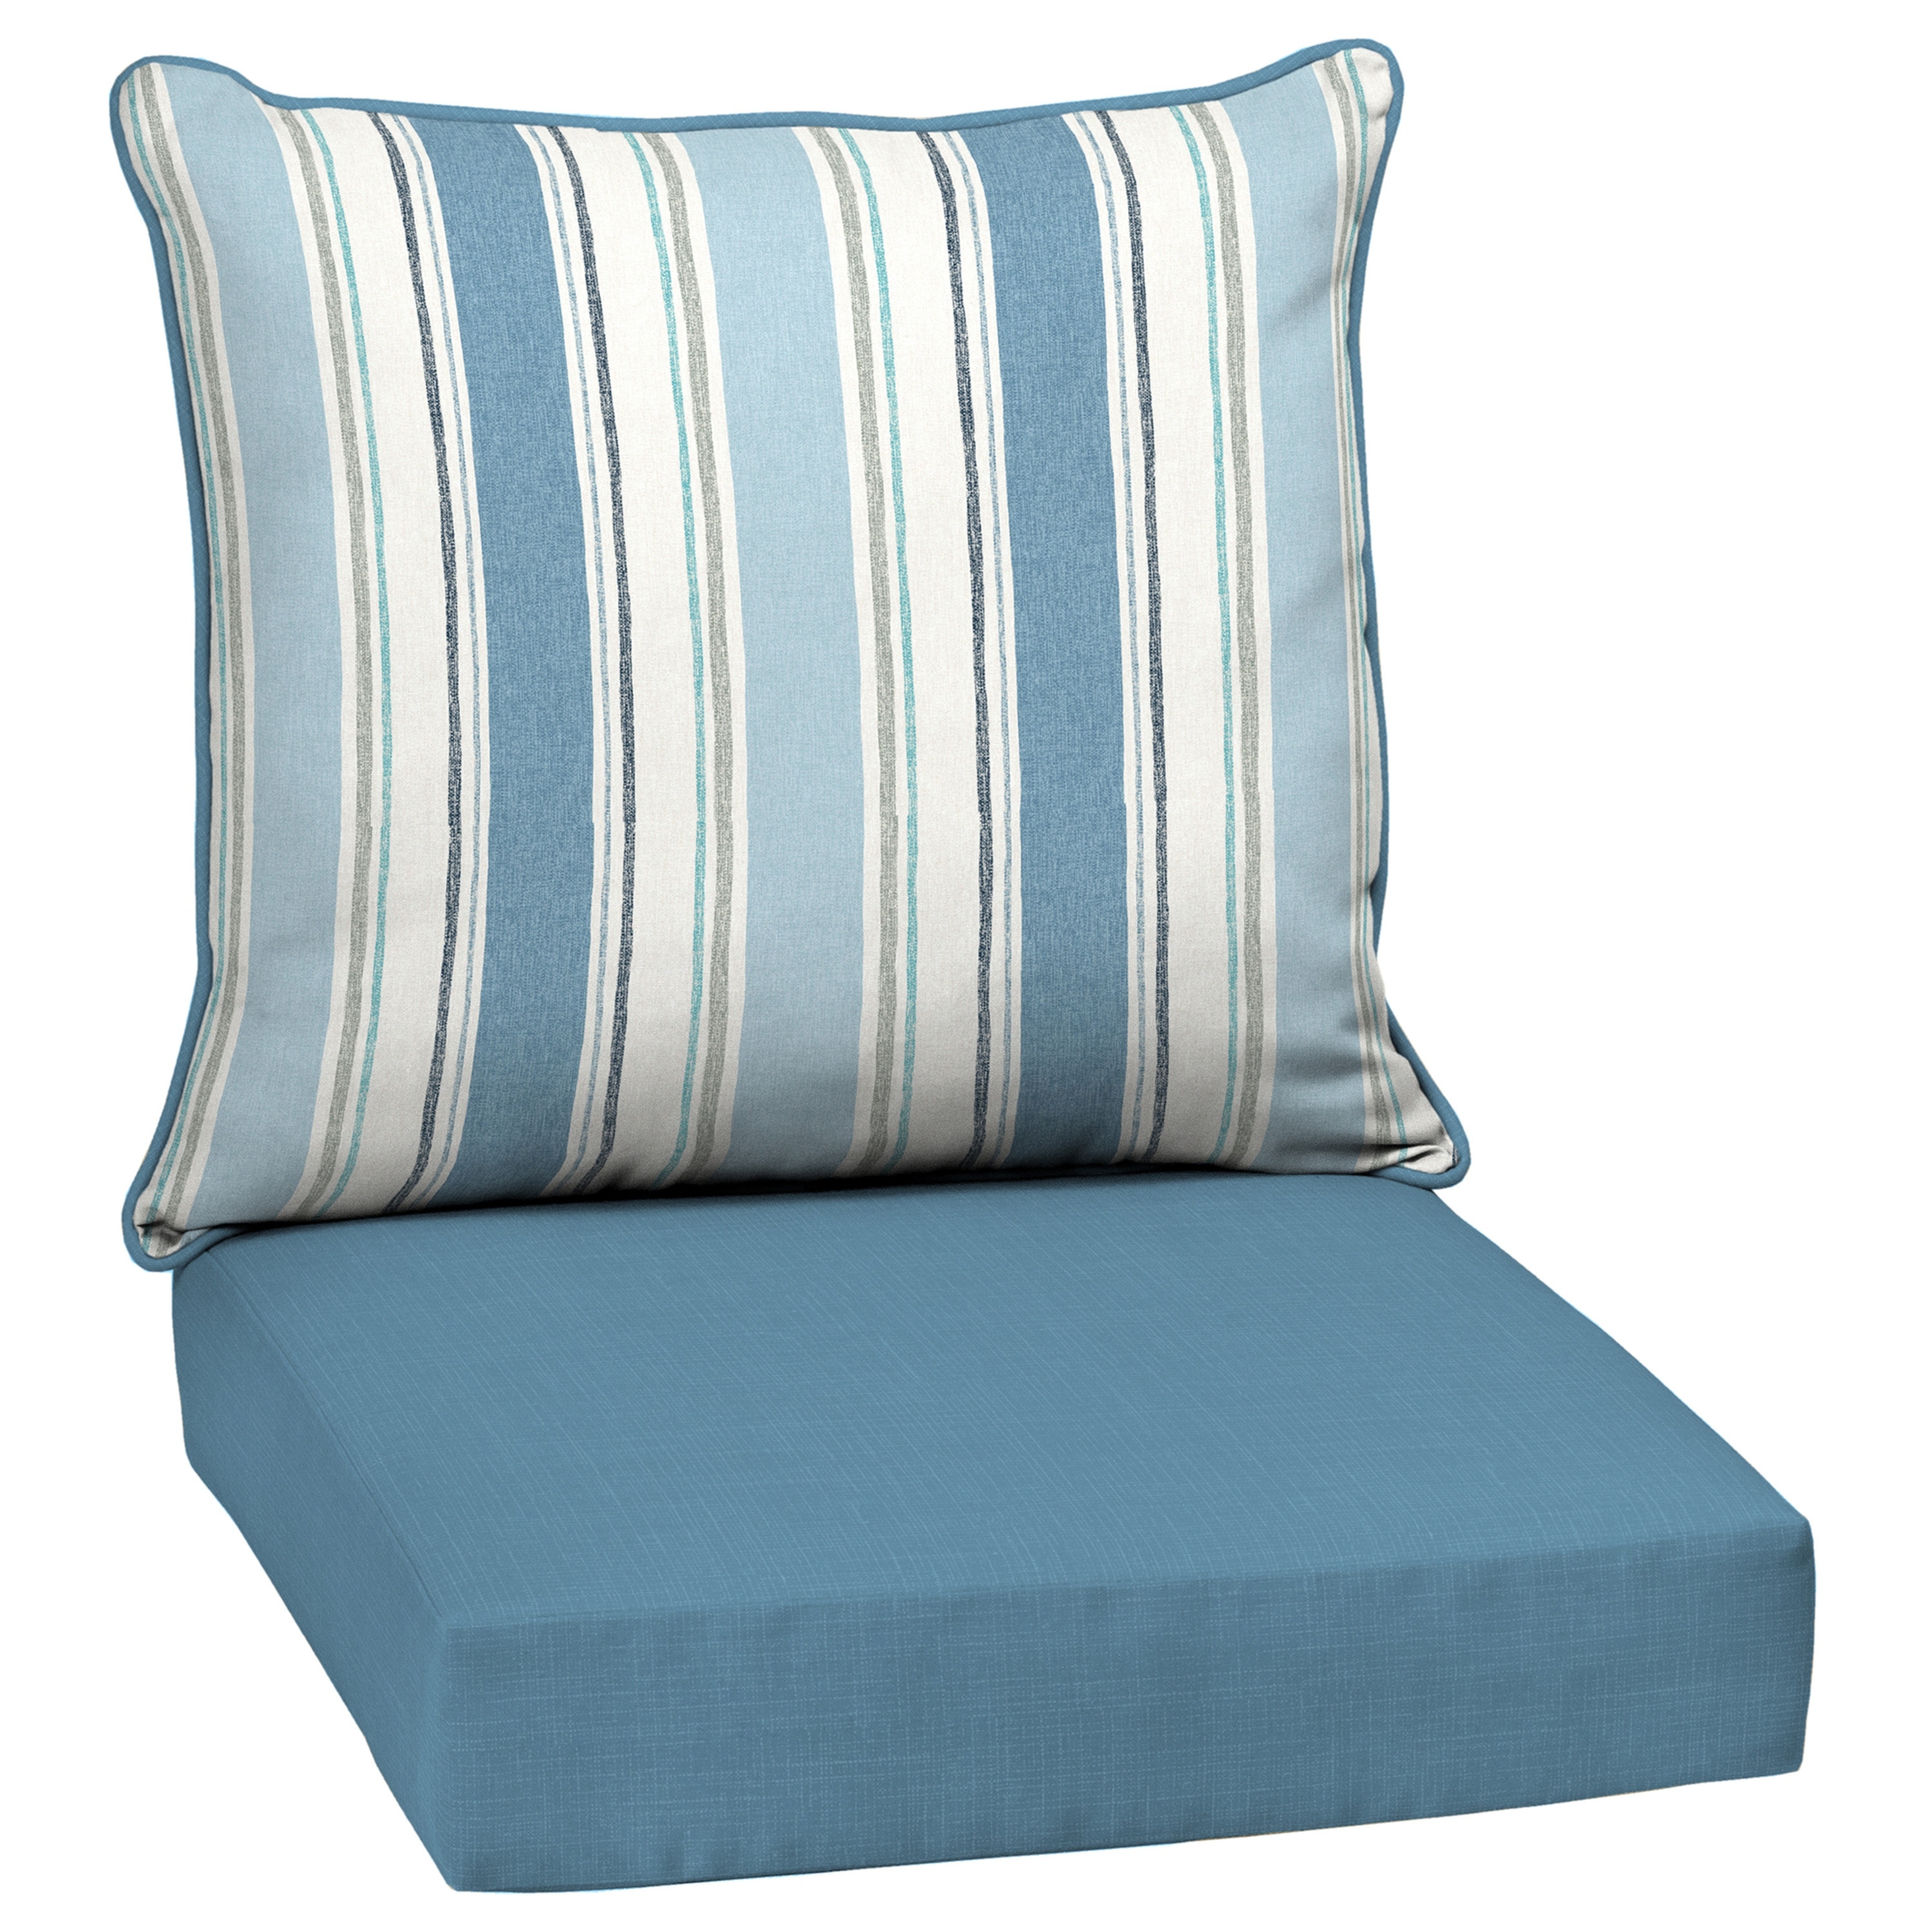 https://ak1.ostkcdn.com/images/products/is/images/direct/63118b167bdd8a1c36b014cd8c8140148ca0e491/Arden-Selections-Outdoor-Deep-Seating-Cushion-Set-24-x-24.jpg